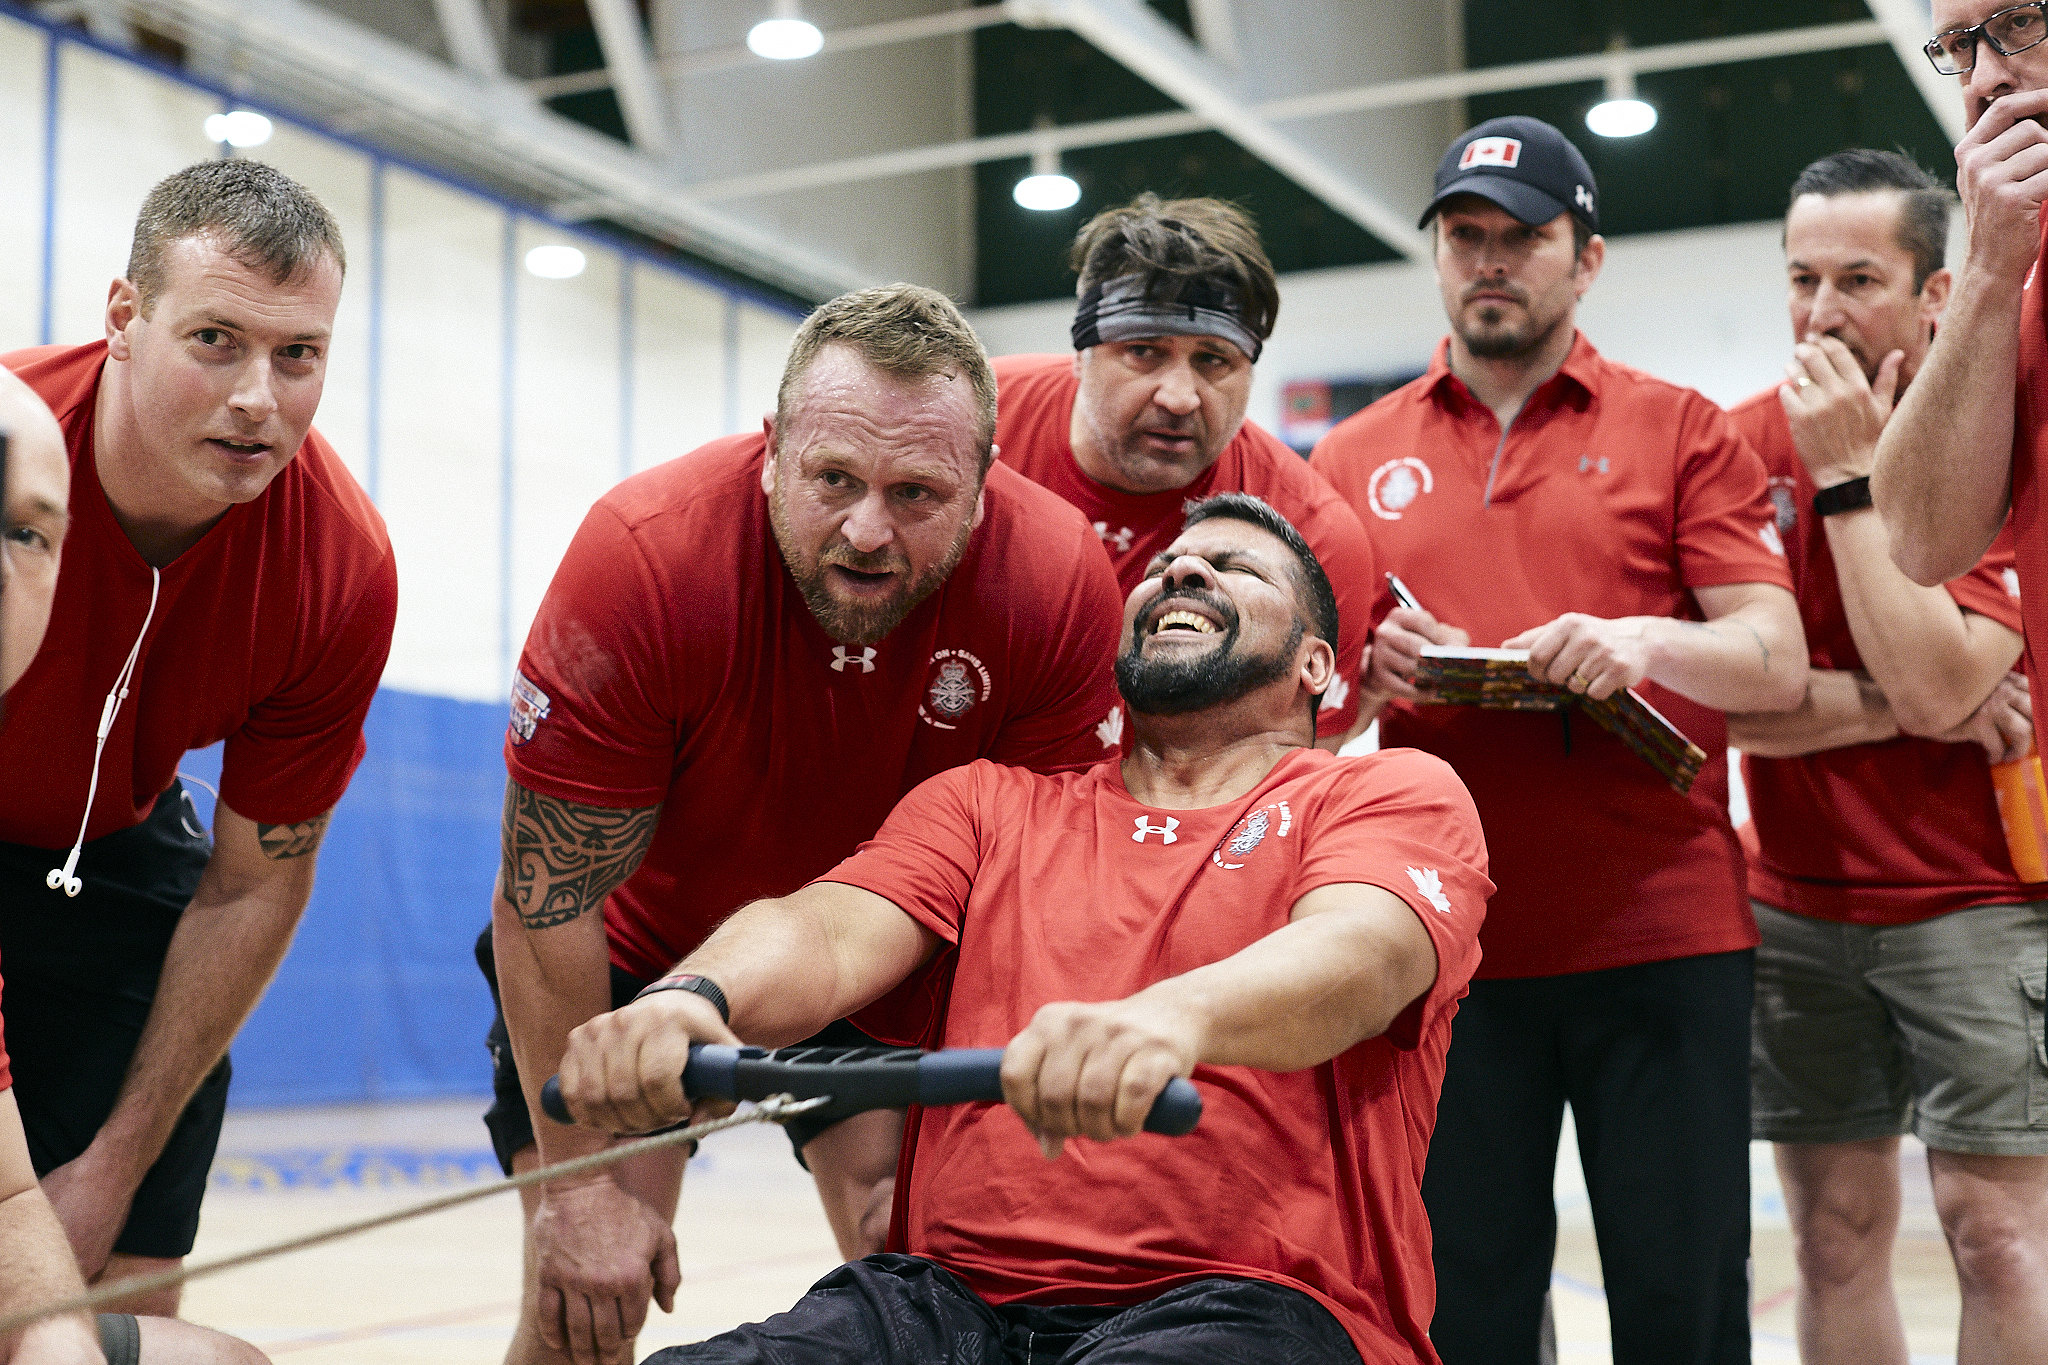 Participate in the 2021 Canadian Indoor Rowing Championships Image